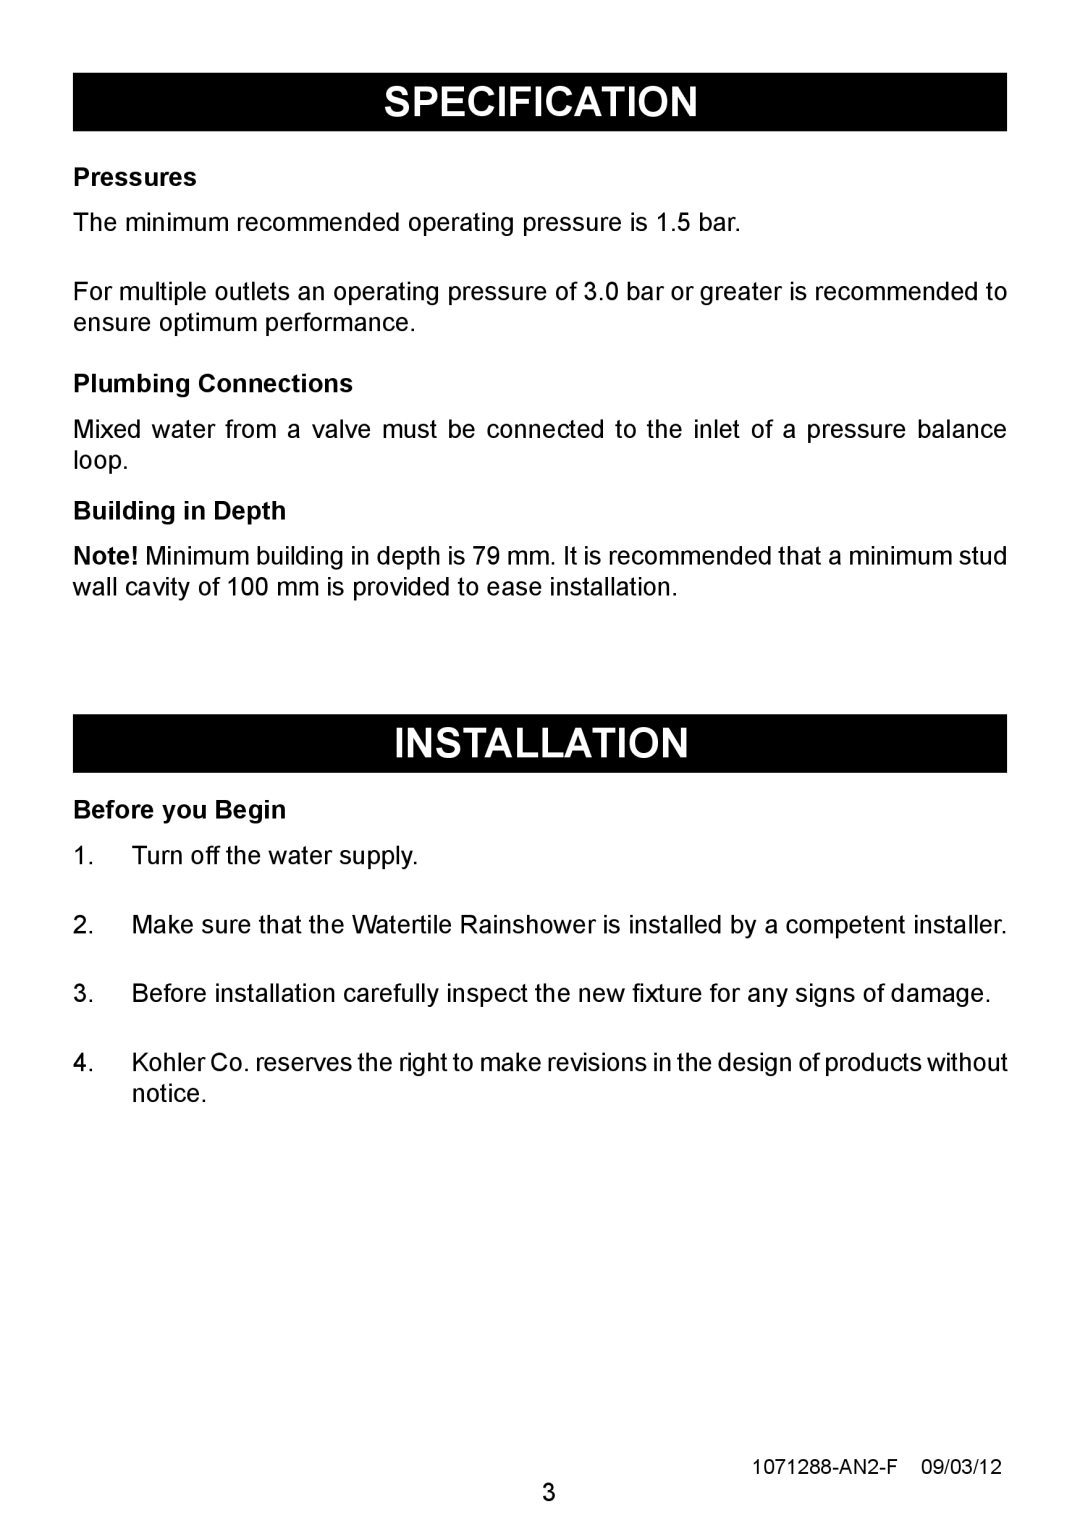 Kohler 8030A manual Specification, Installation, Pressures, Plumbing Connections, Building in Depth, Before you Begin 